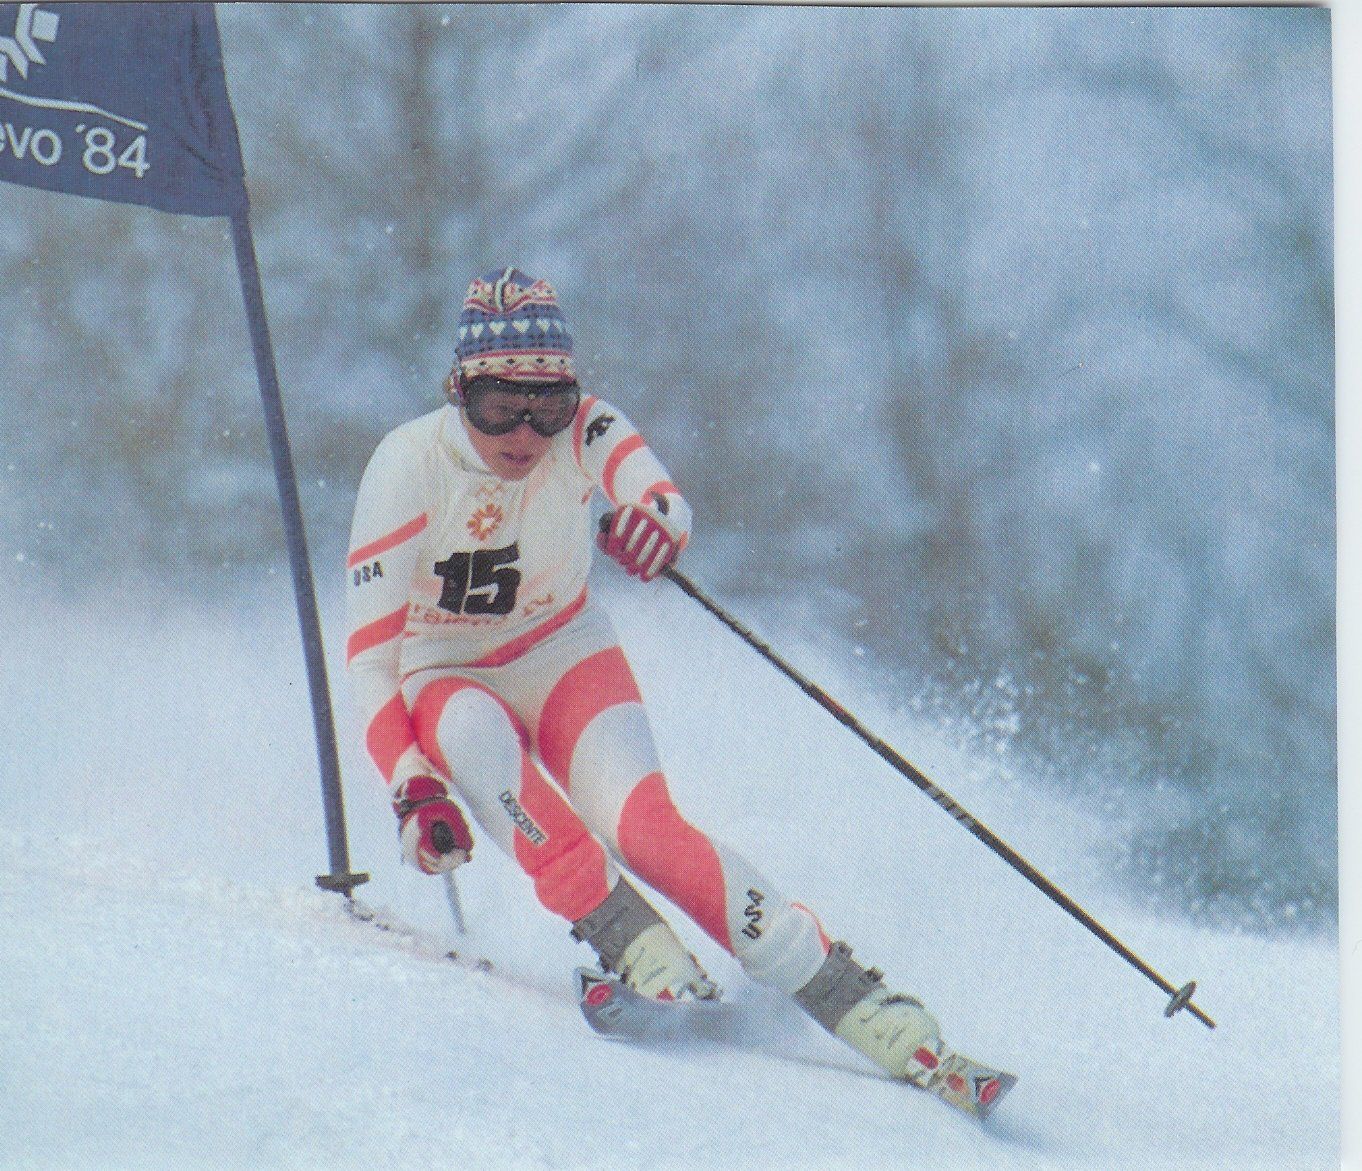 SKiStrong™ | Gallery | Merchandise and Skiing with Deb Armstrong